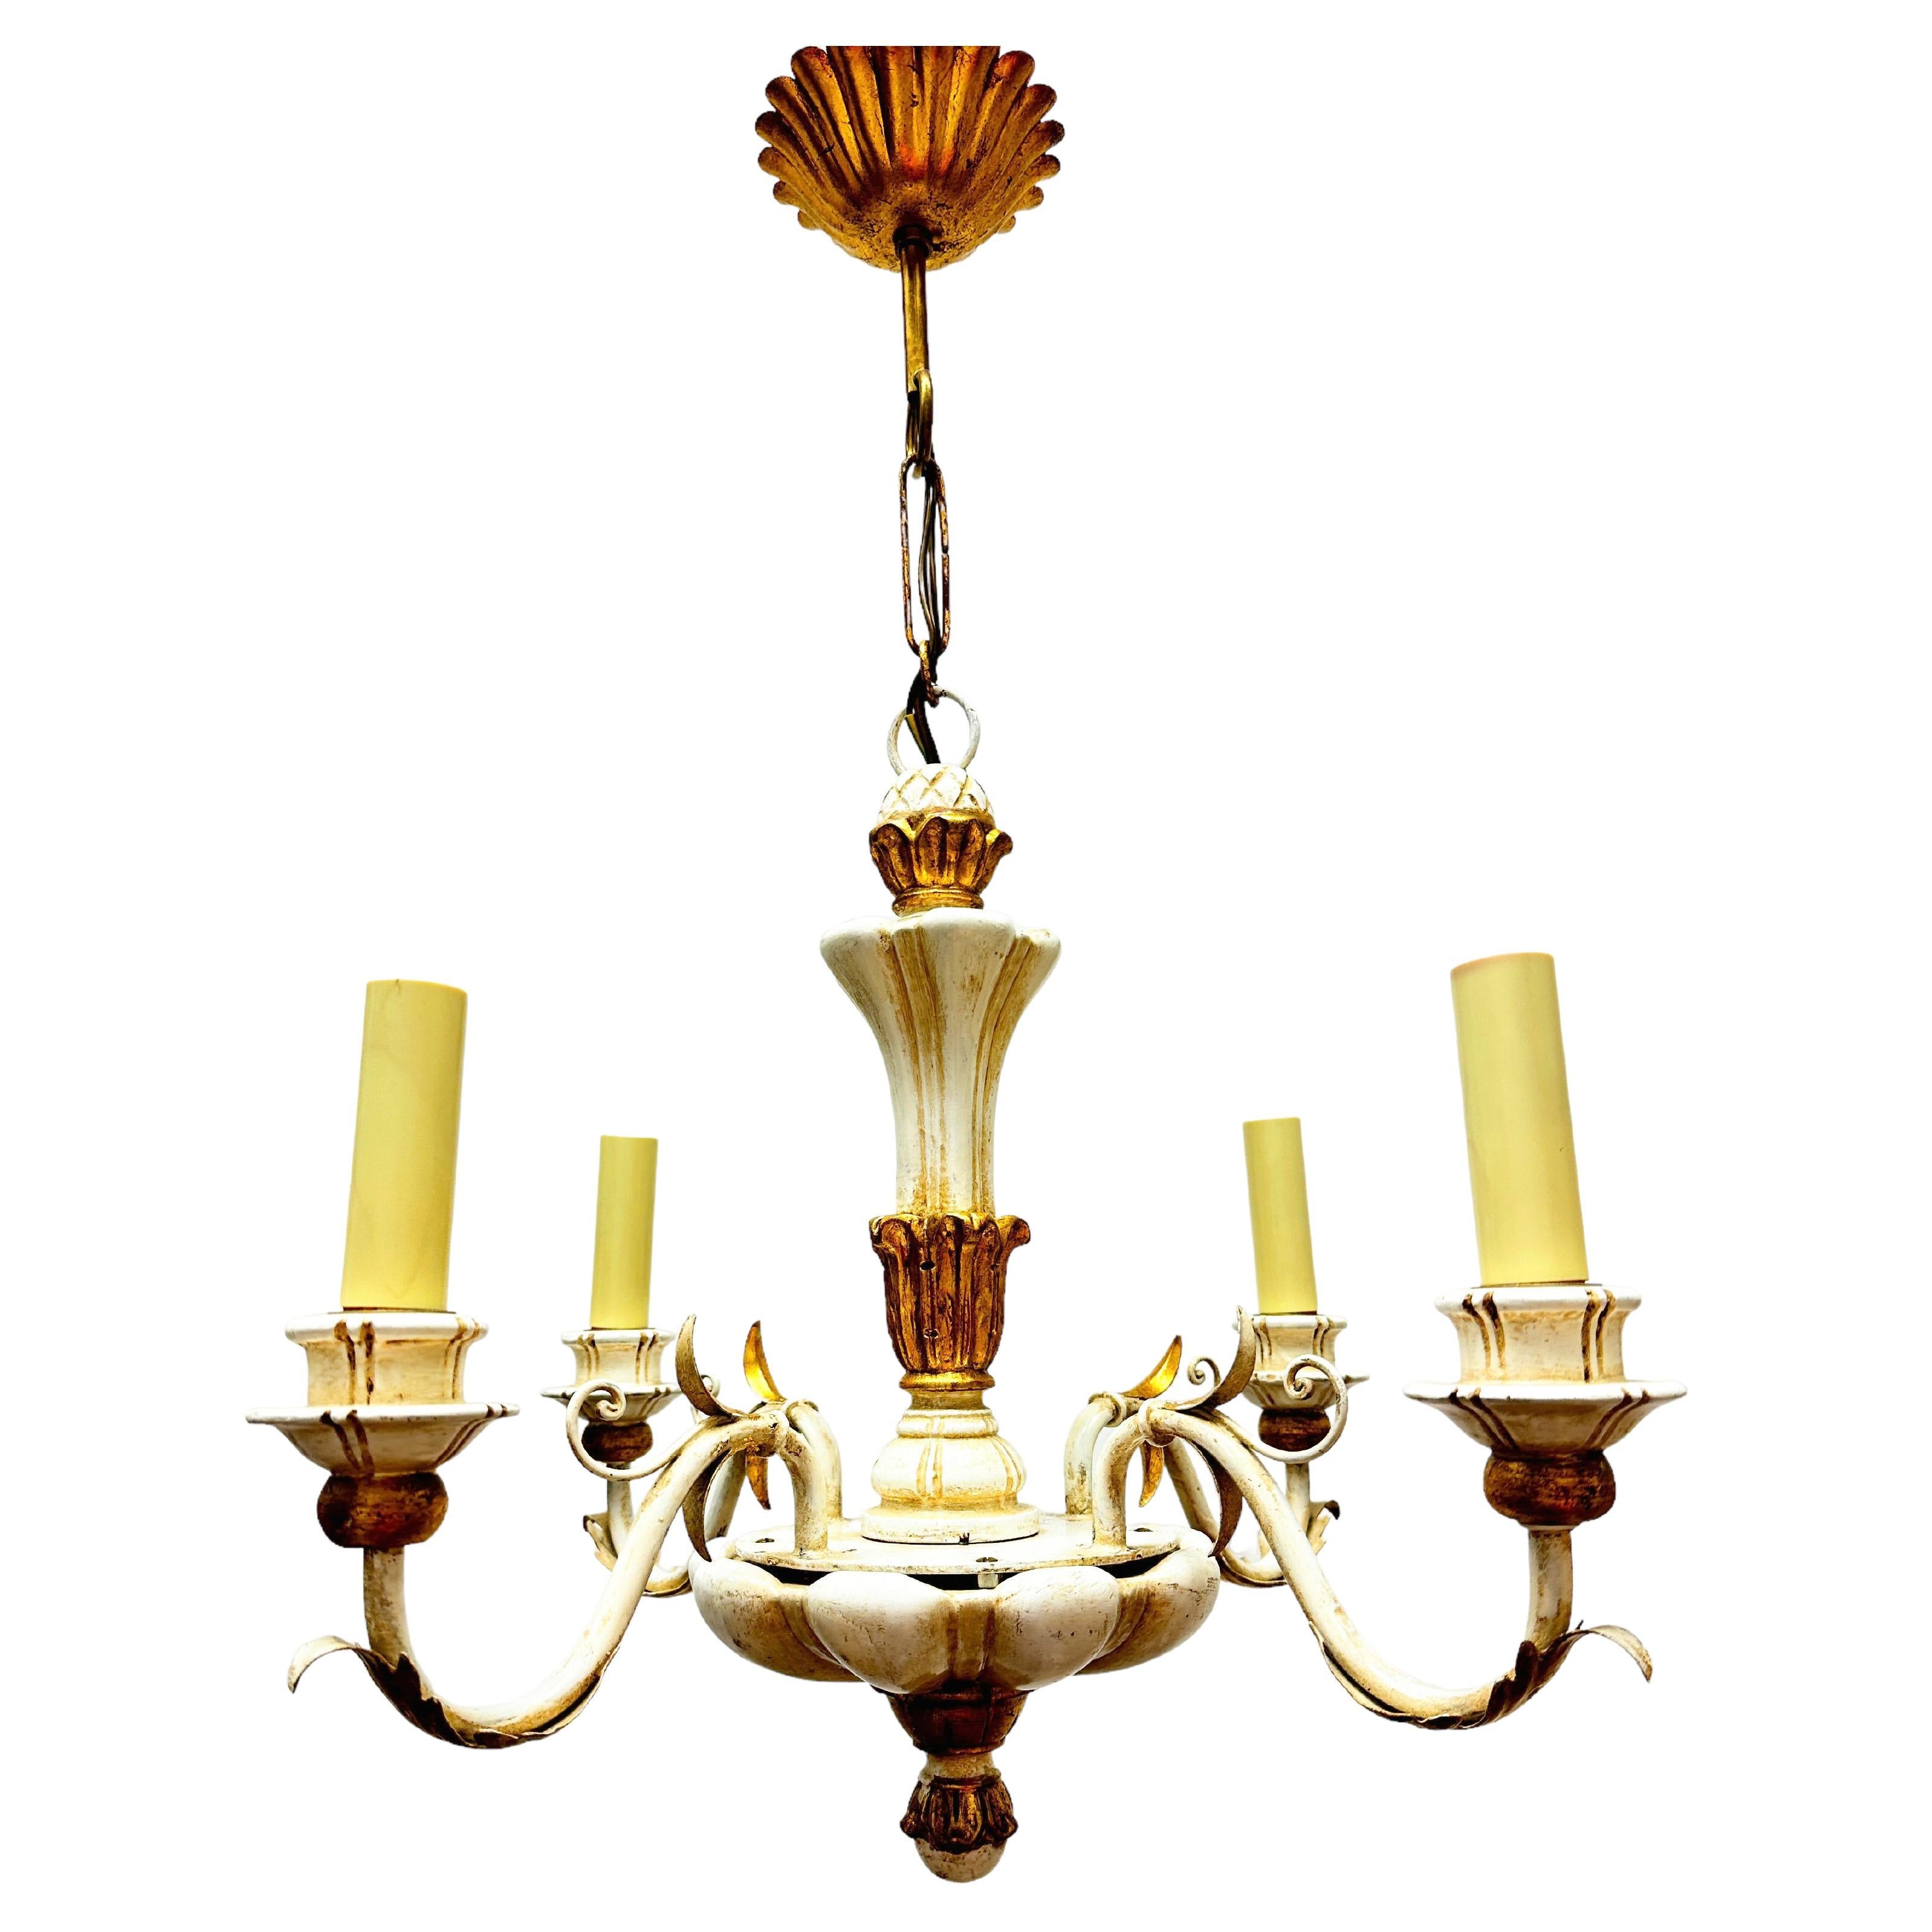 Four Light Chippy White & Giltwood Hollywood Regency Chandelier Tole, Austria For Sale